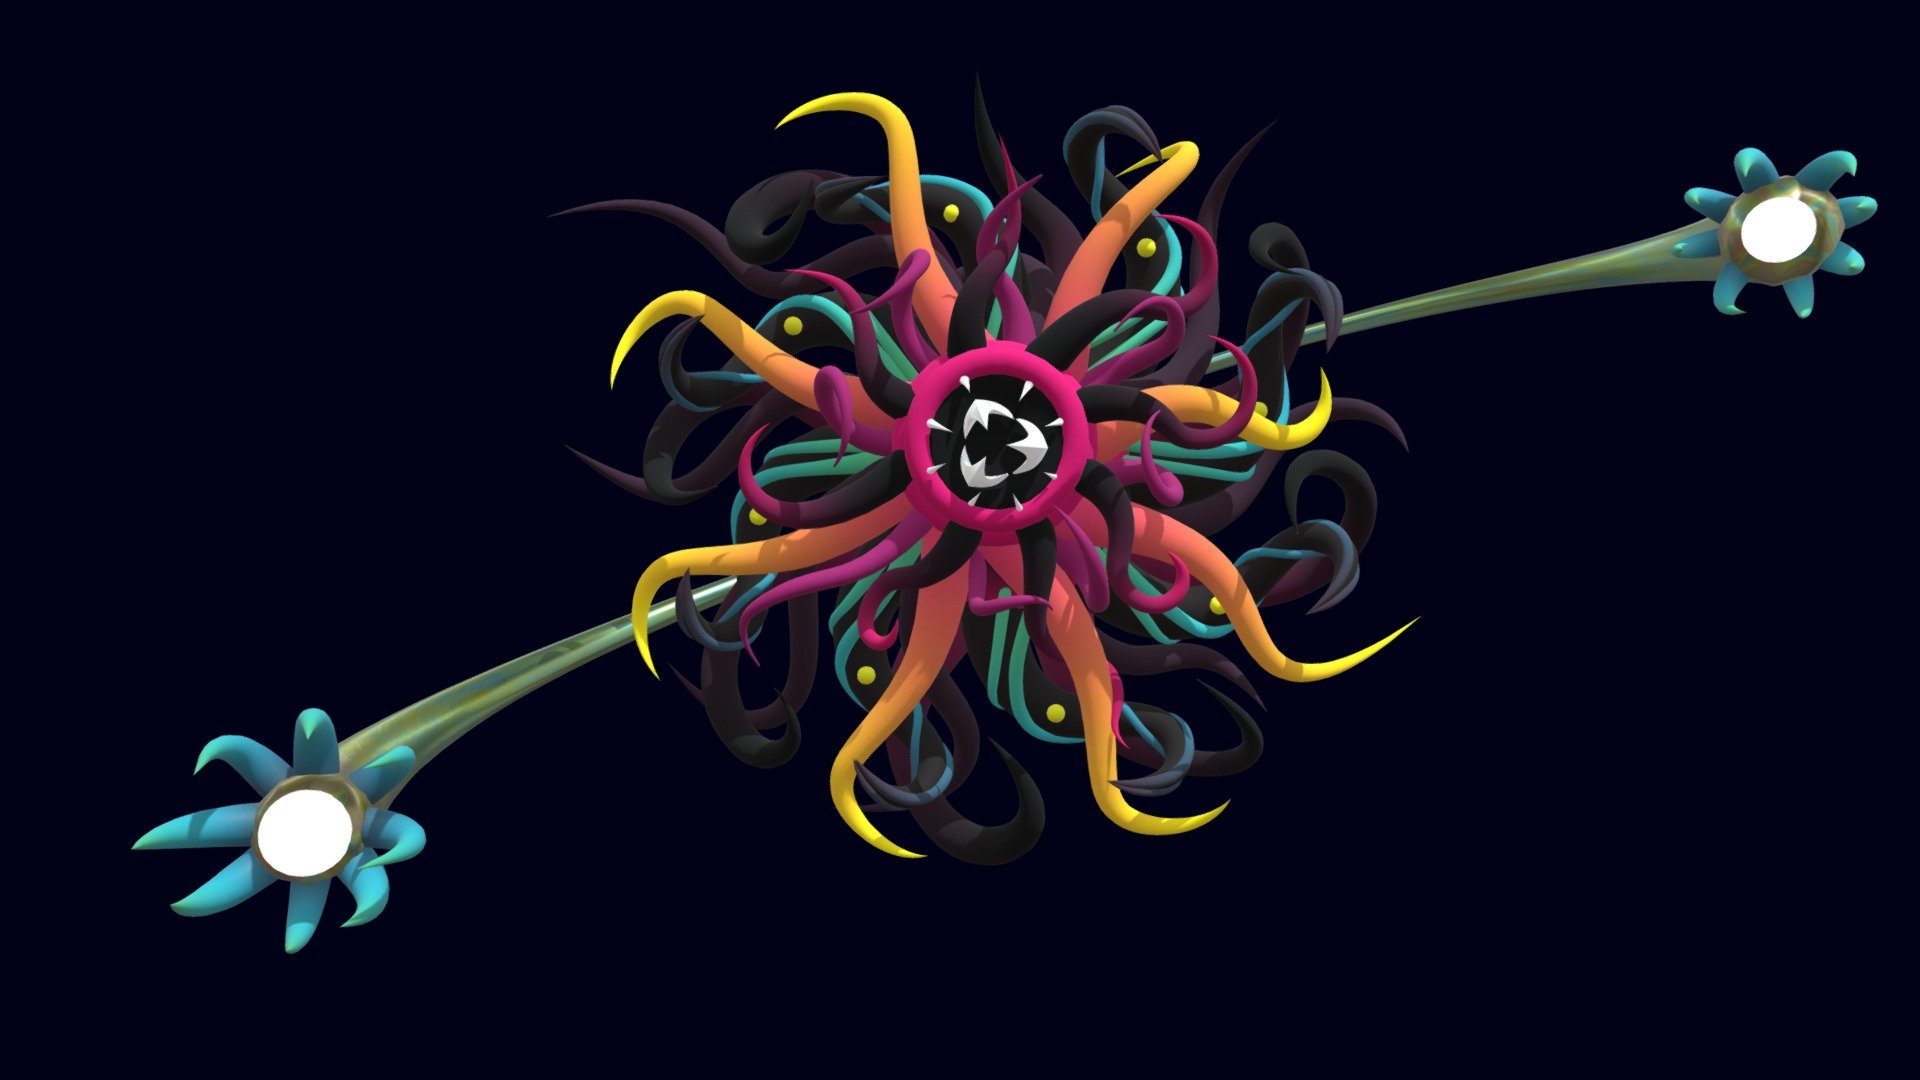 Neon Anenome - Download Free 3D model by Metageist [237a64b] - Sketchfab